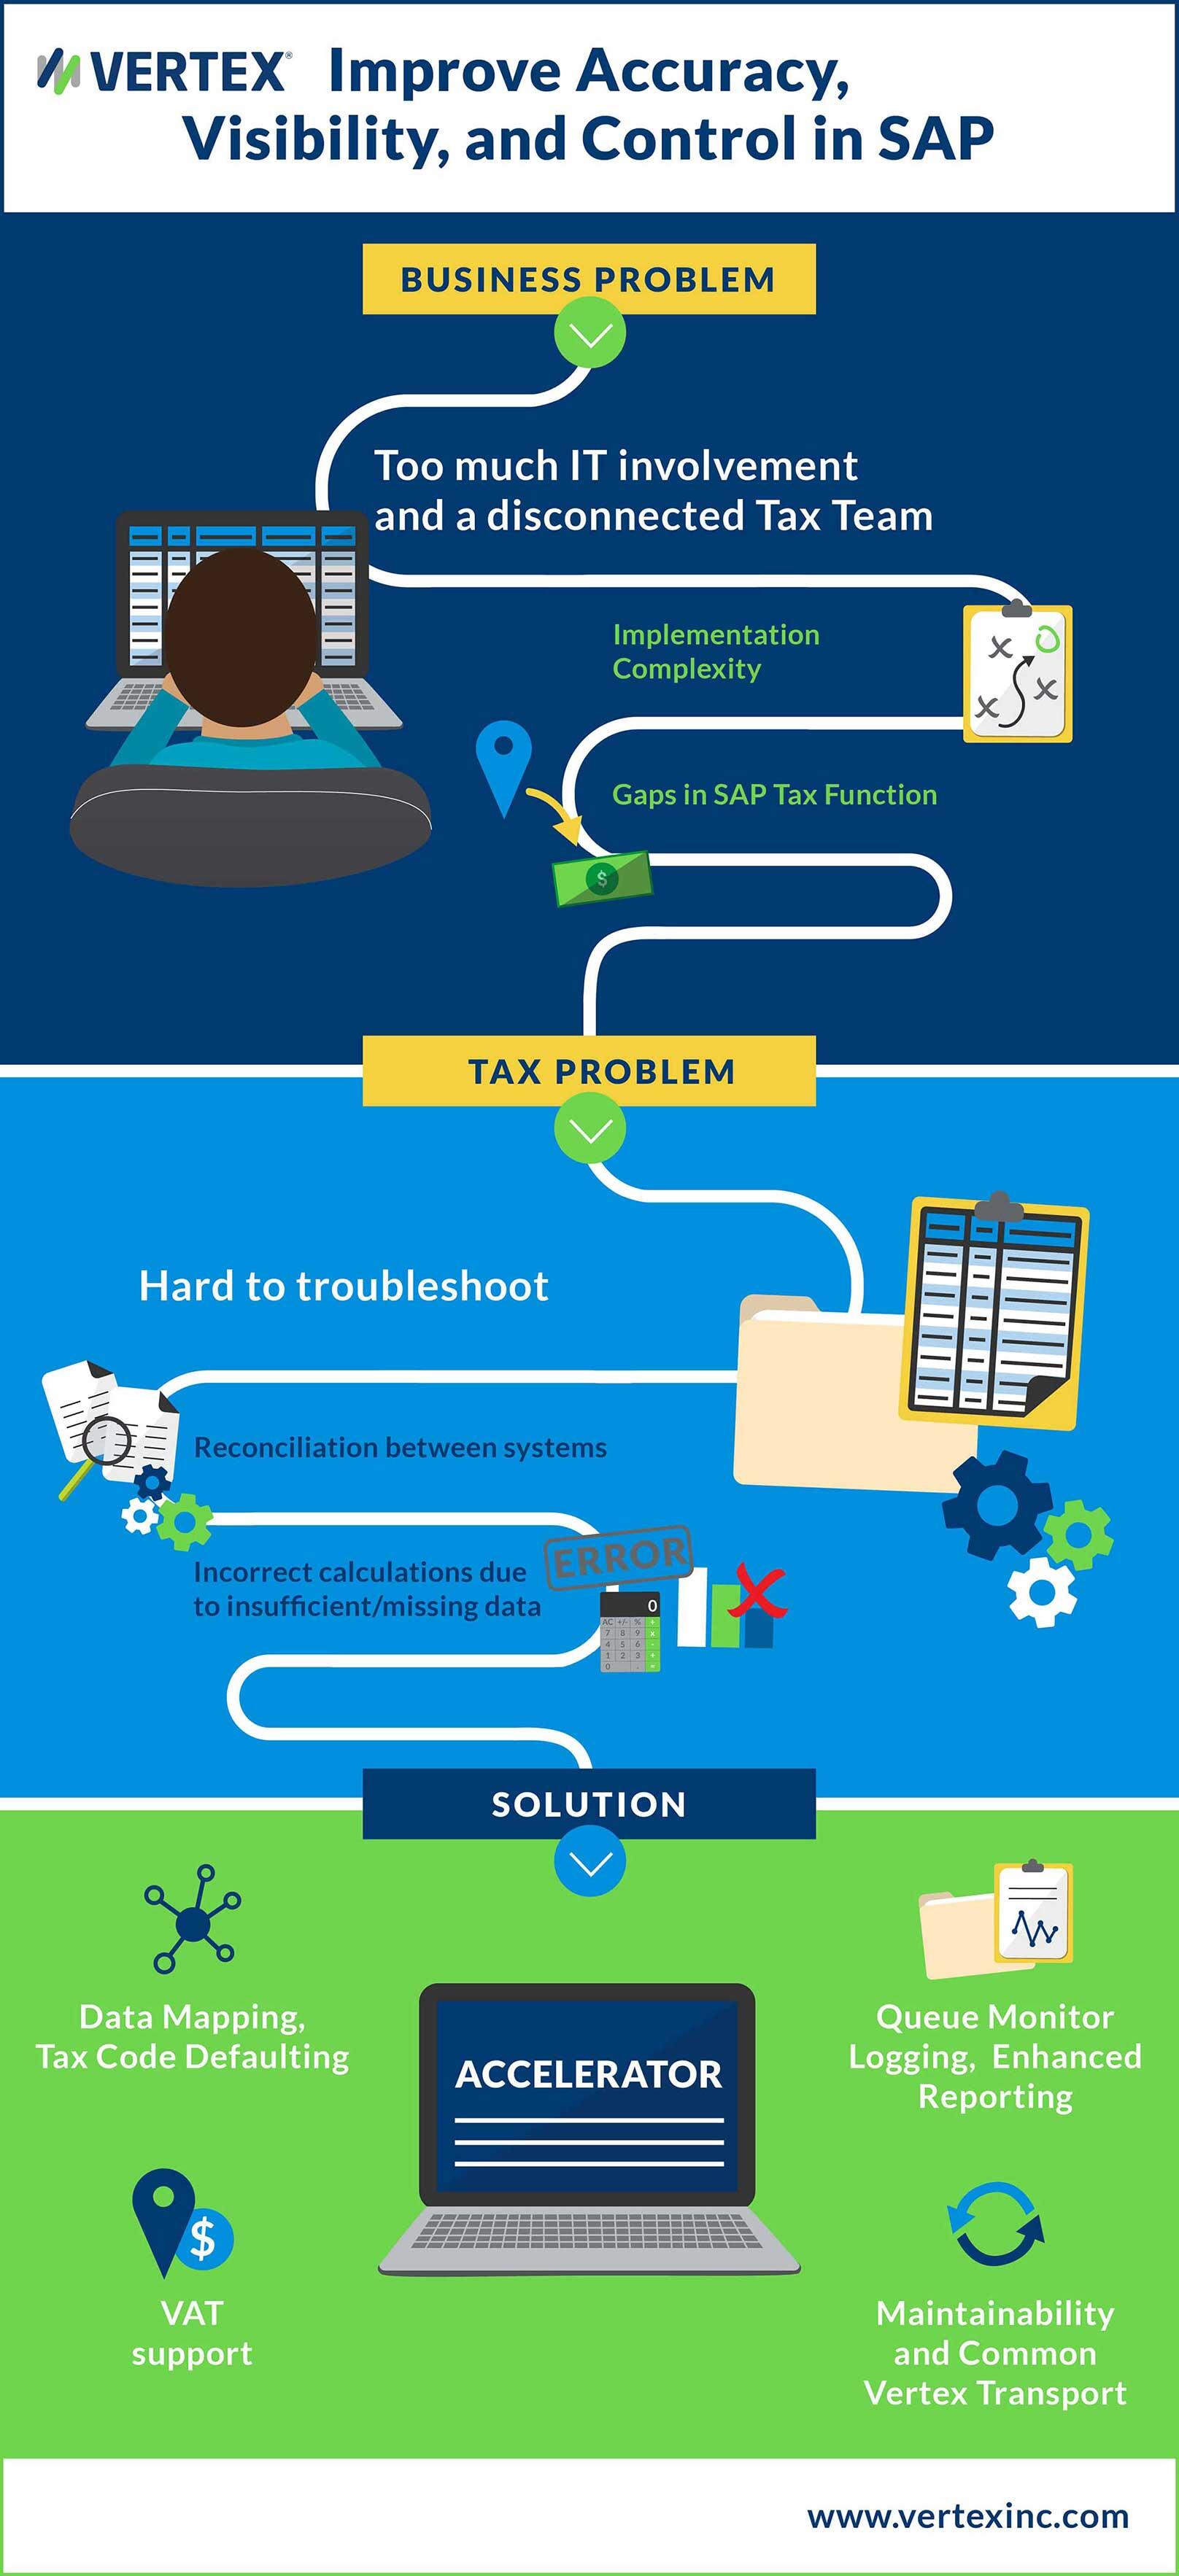 An infographic outlining how to improve accuracy, visibility, and control in SAP.